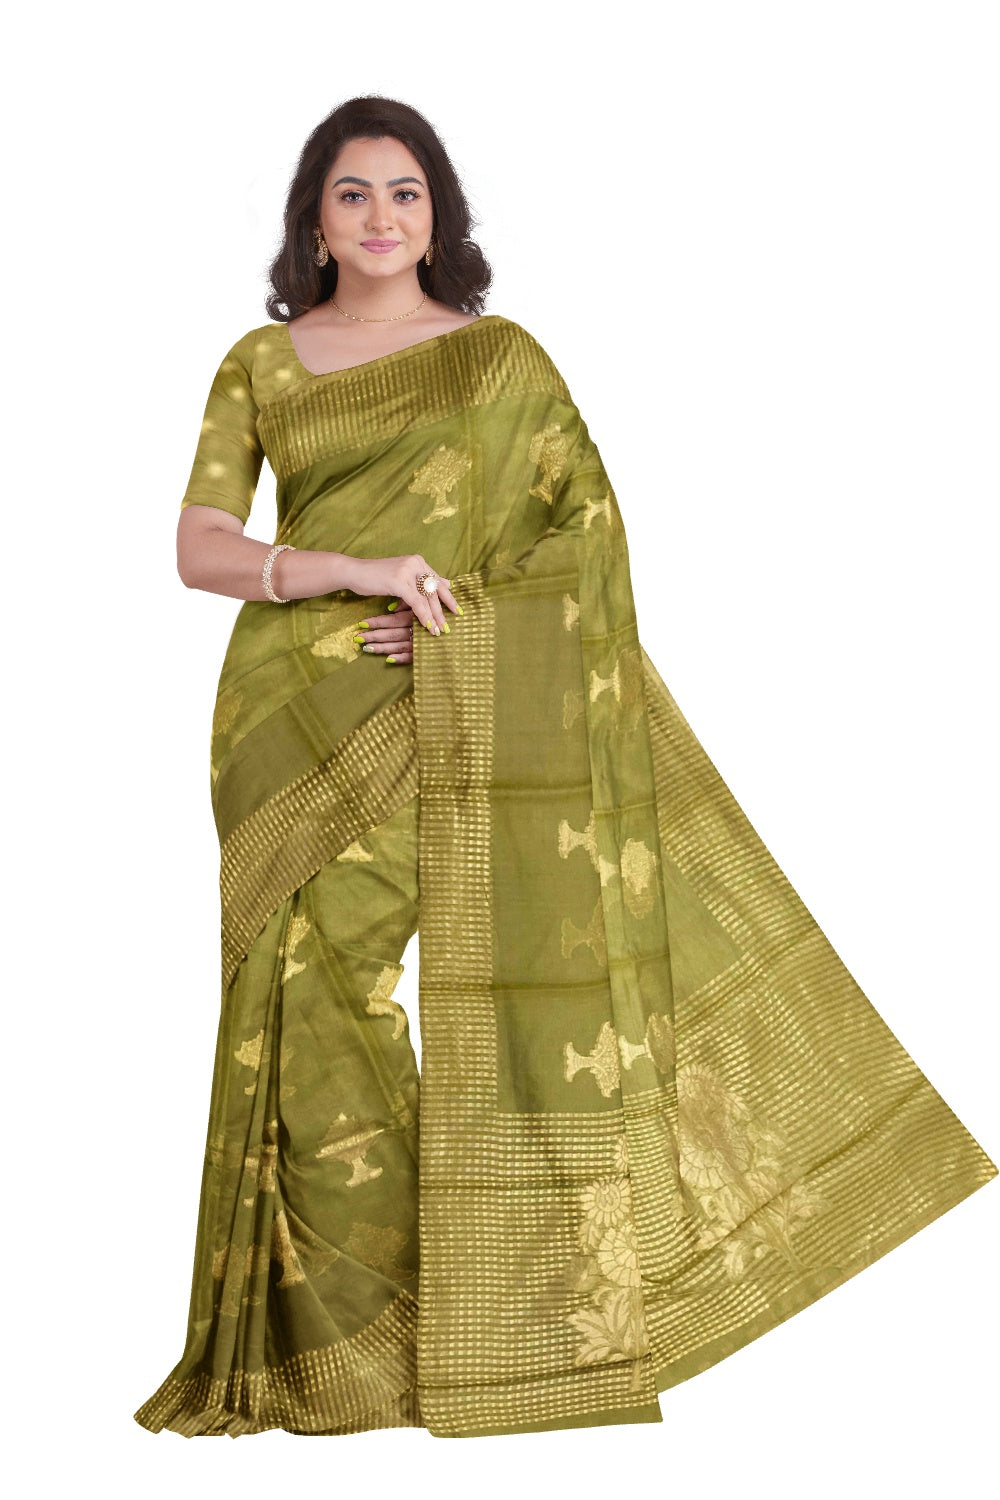 Southloom Olive Green Cotton Designer Saree with Floral work